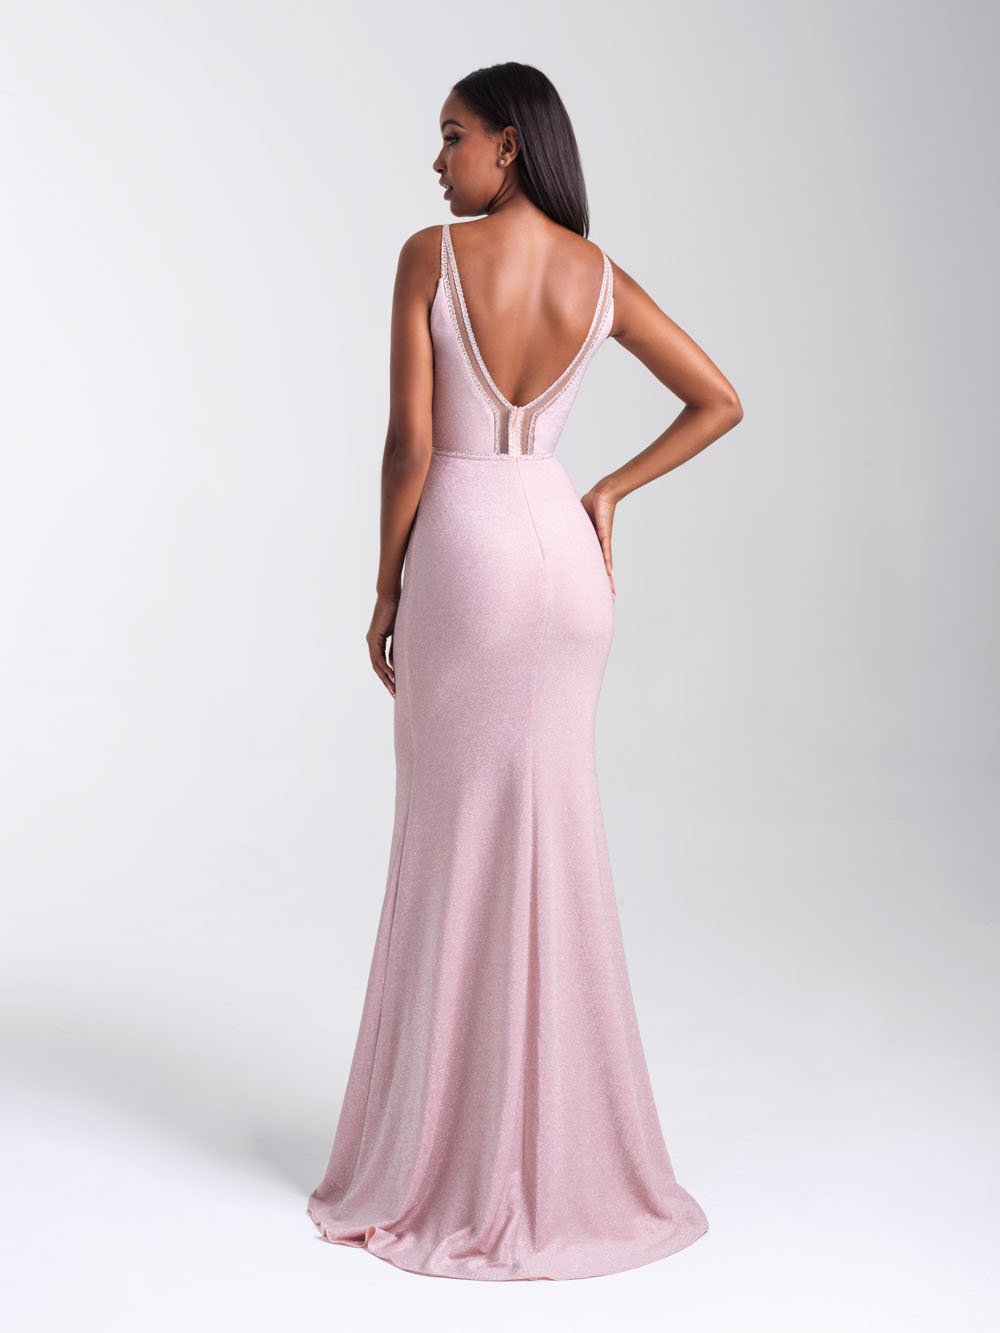 Madison James 20-303 dress images in these colors: Blush, Ice Blue.